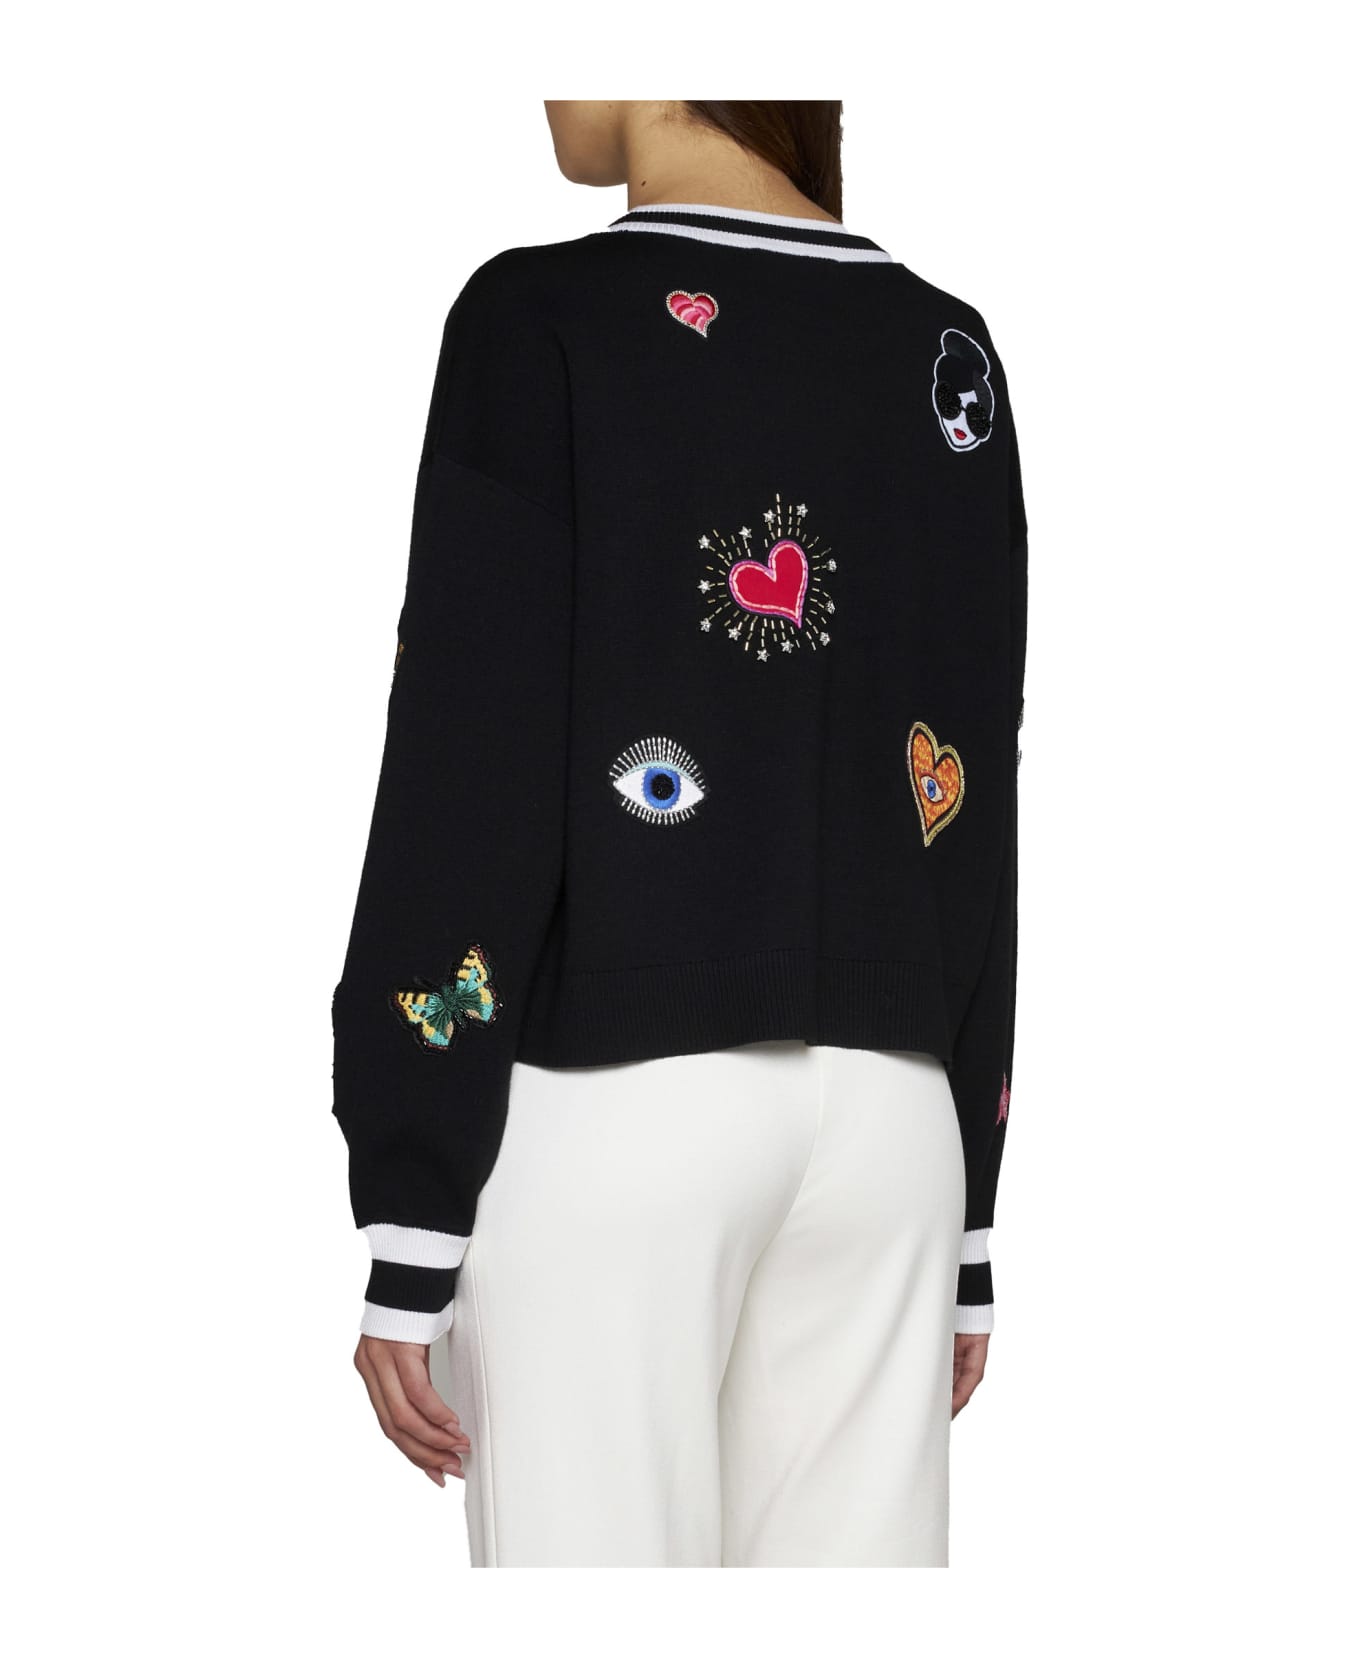 & white patterns pay tribute to holiday knitted sweaters Sweater - Multi black